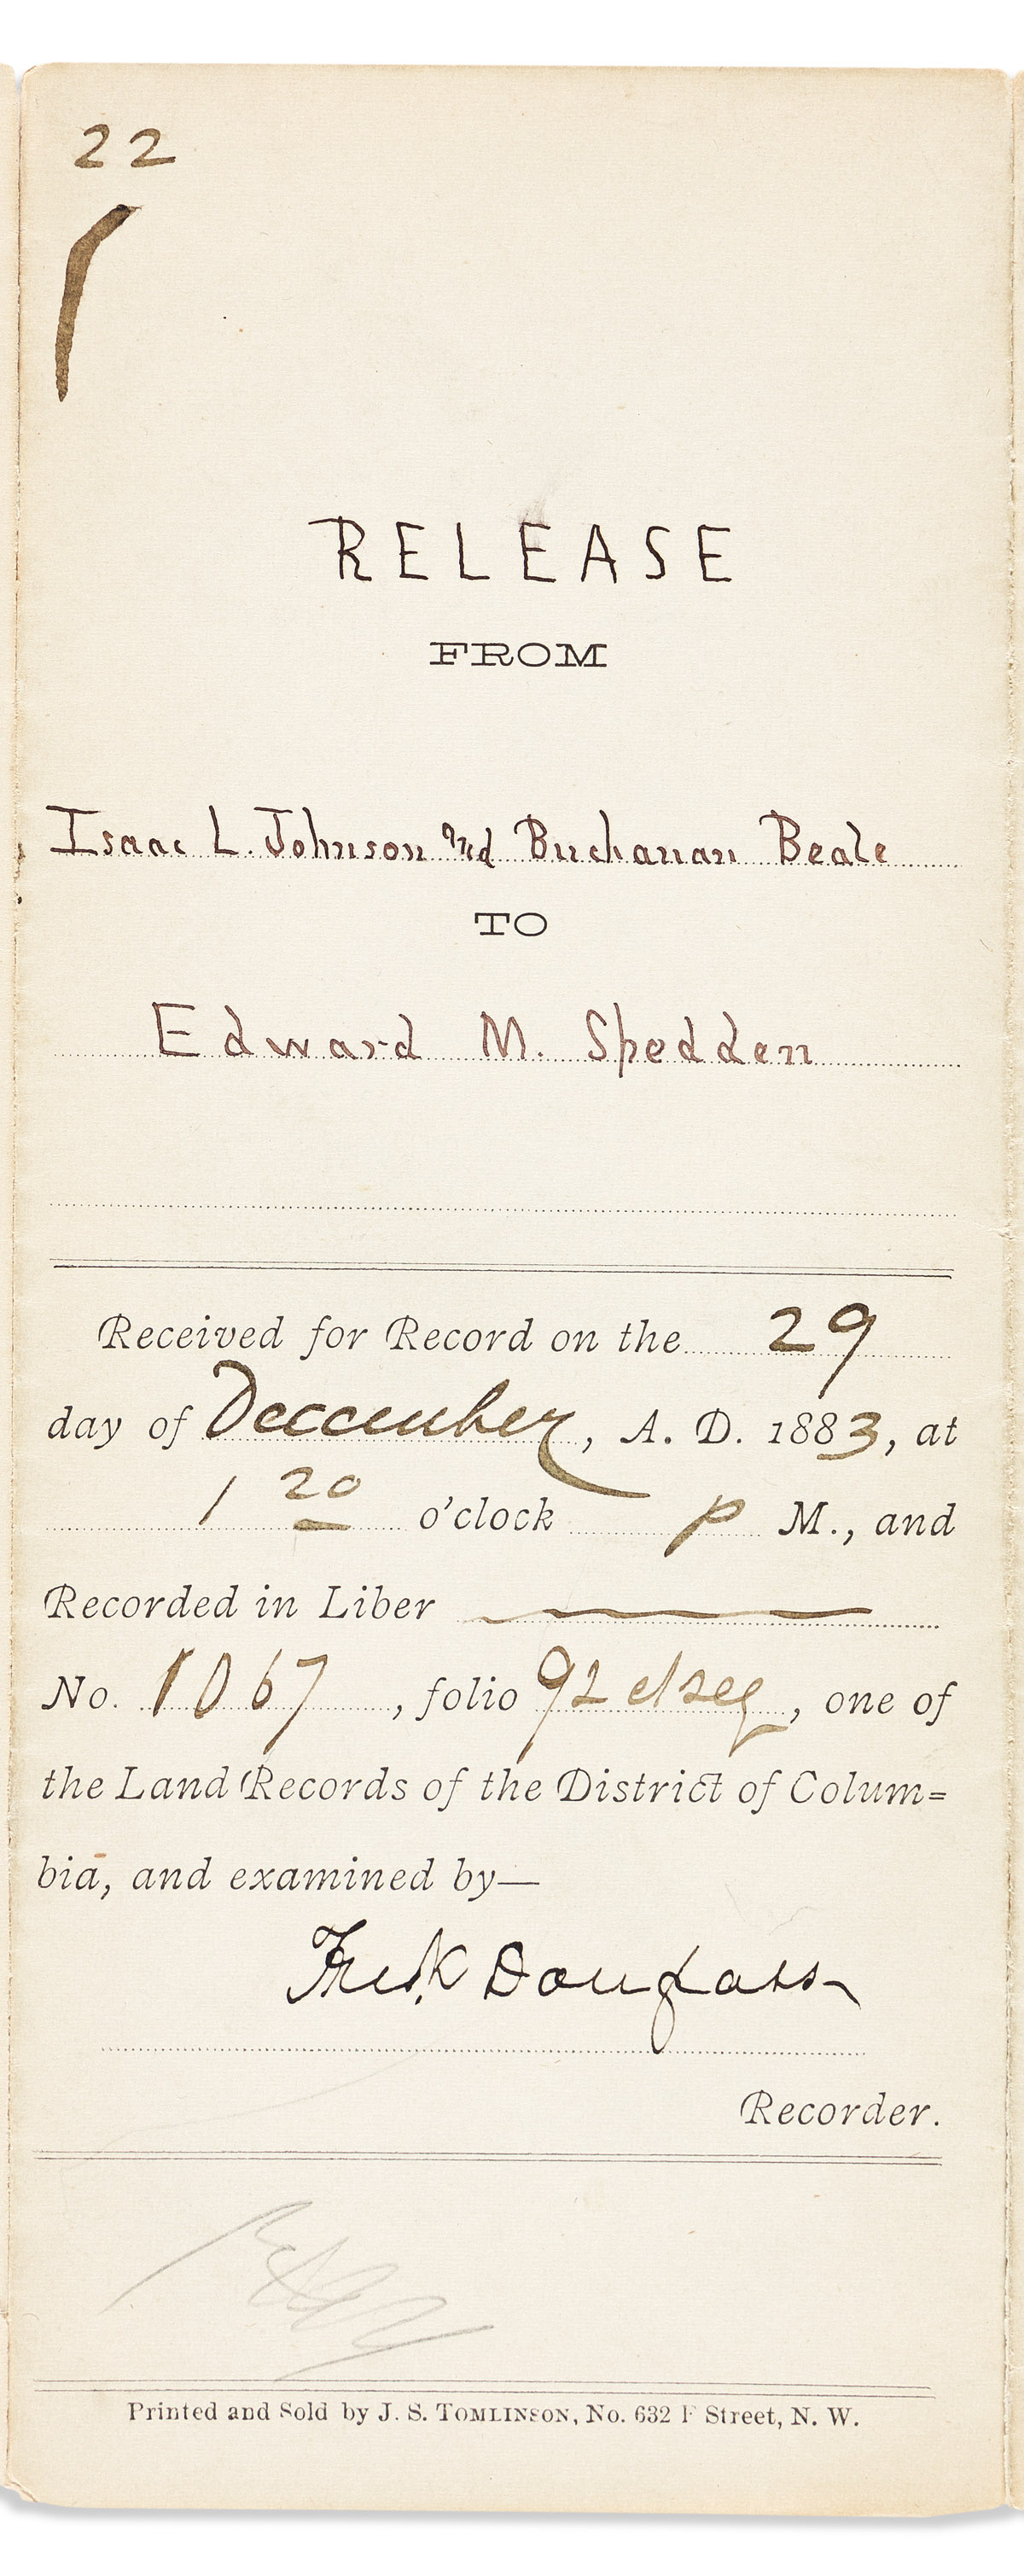 (CIVIL RIGHTS.) DOUGLASS, FREDERICK. Partly-printed endorsement Signed, Fredk Douglass, as Recorder of Deeds, certifying a deed